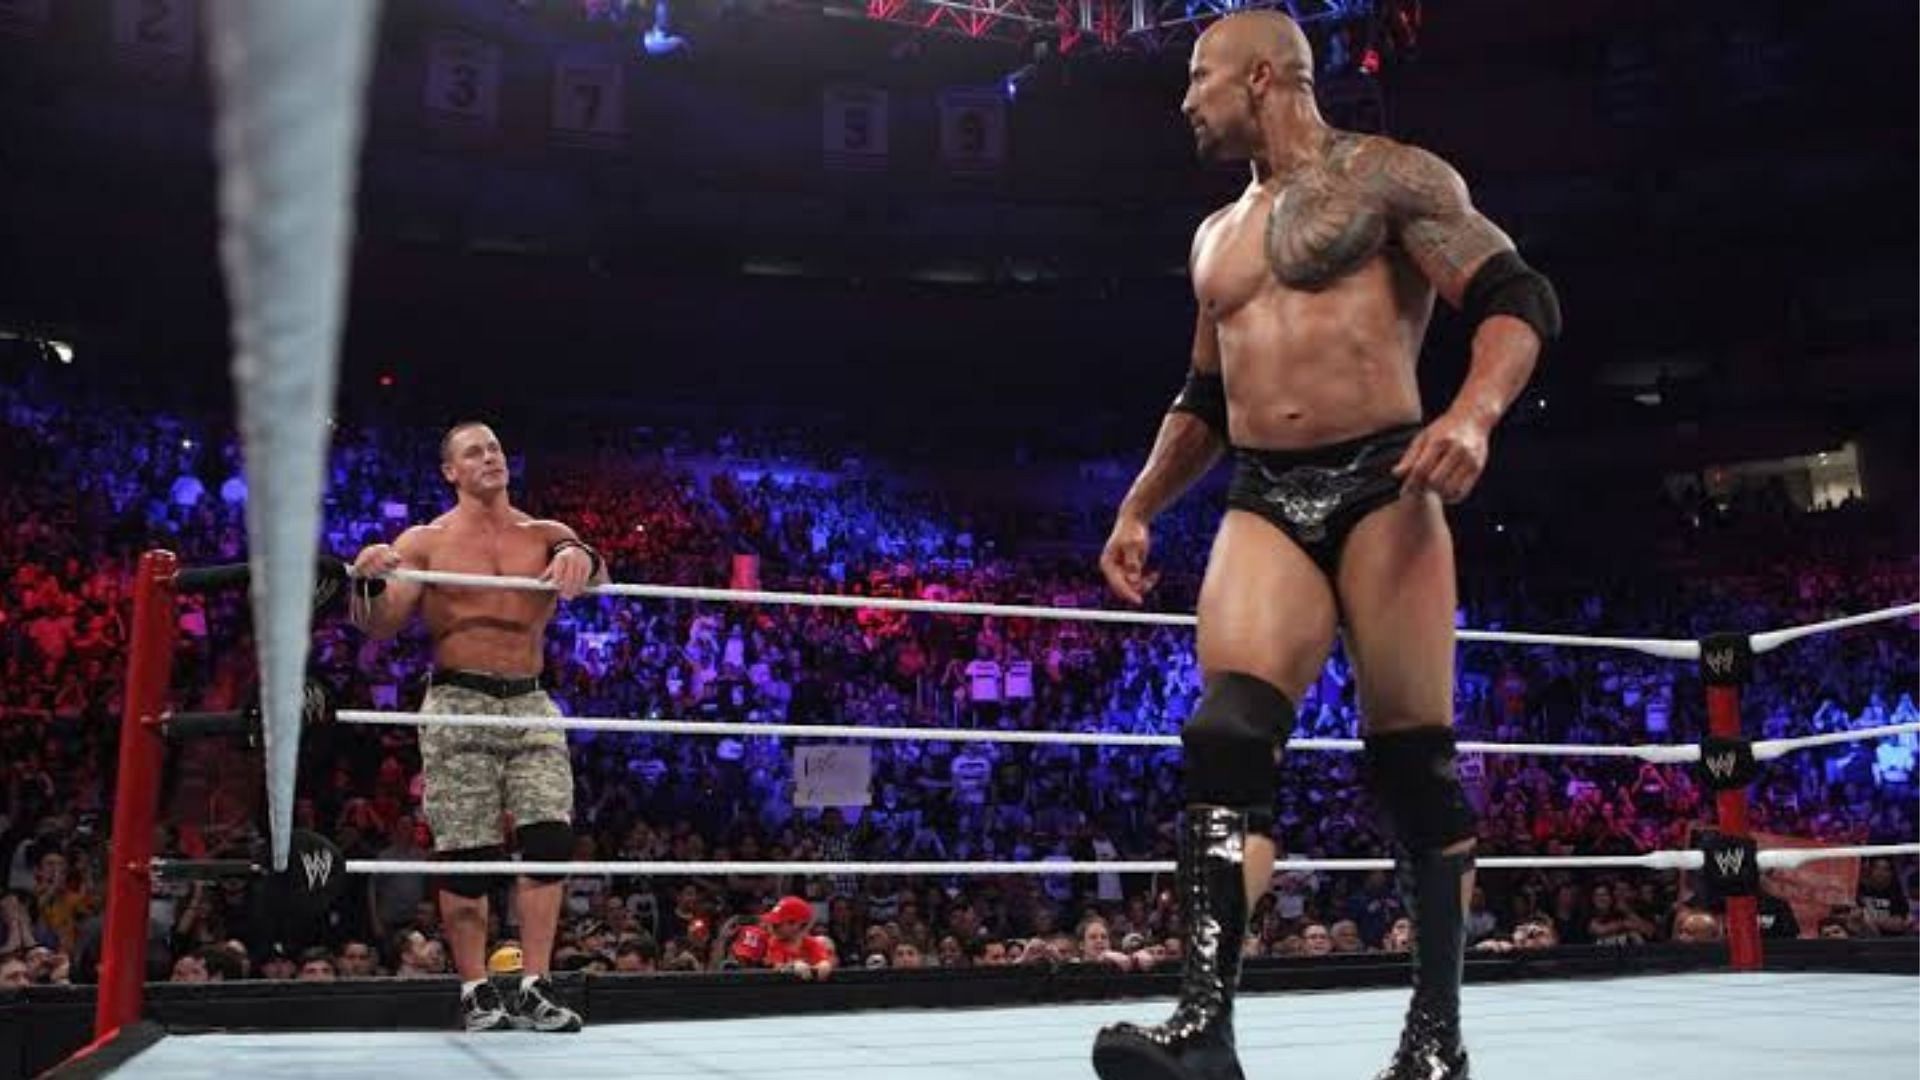 The Once in a Lifetime tag team of John Cena and The Rock occured 12 years ago and 